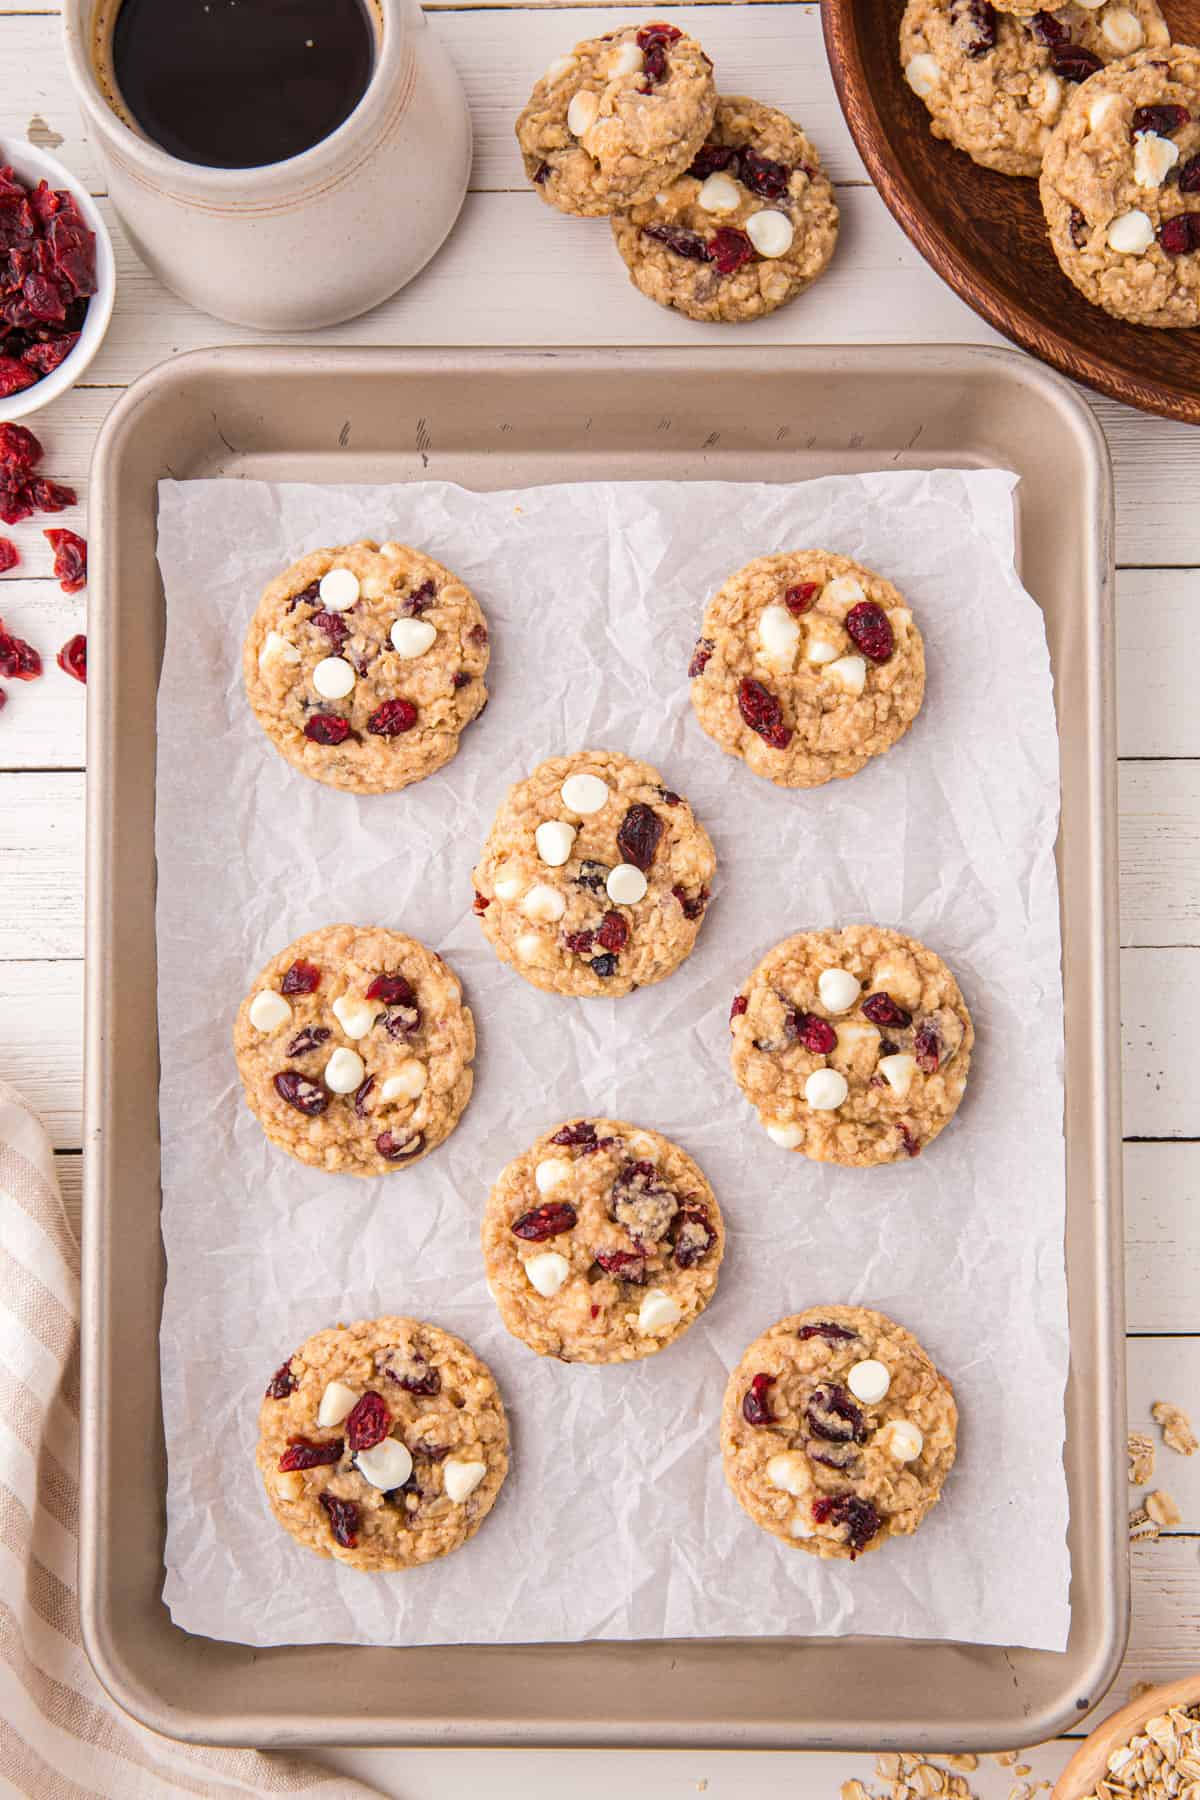 Baked white chocolate cranberry oatmeal cookies on baking sheet.